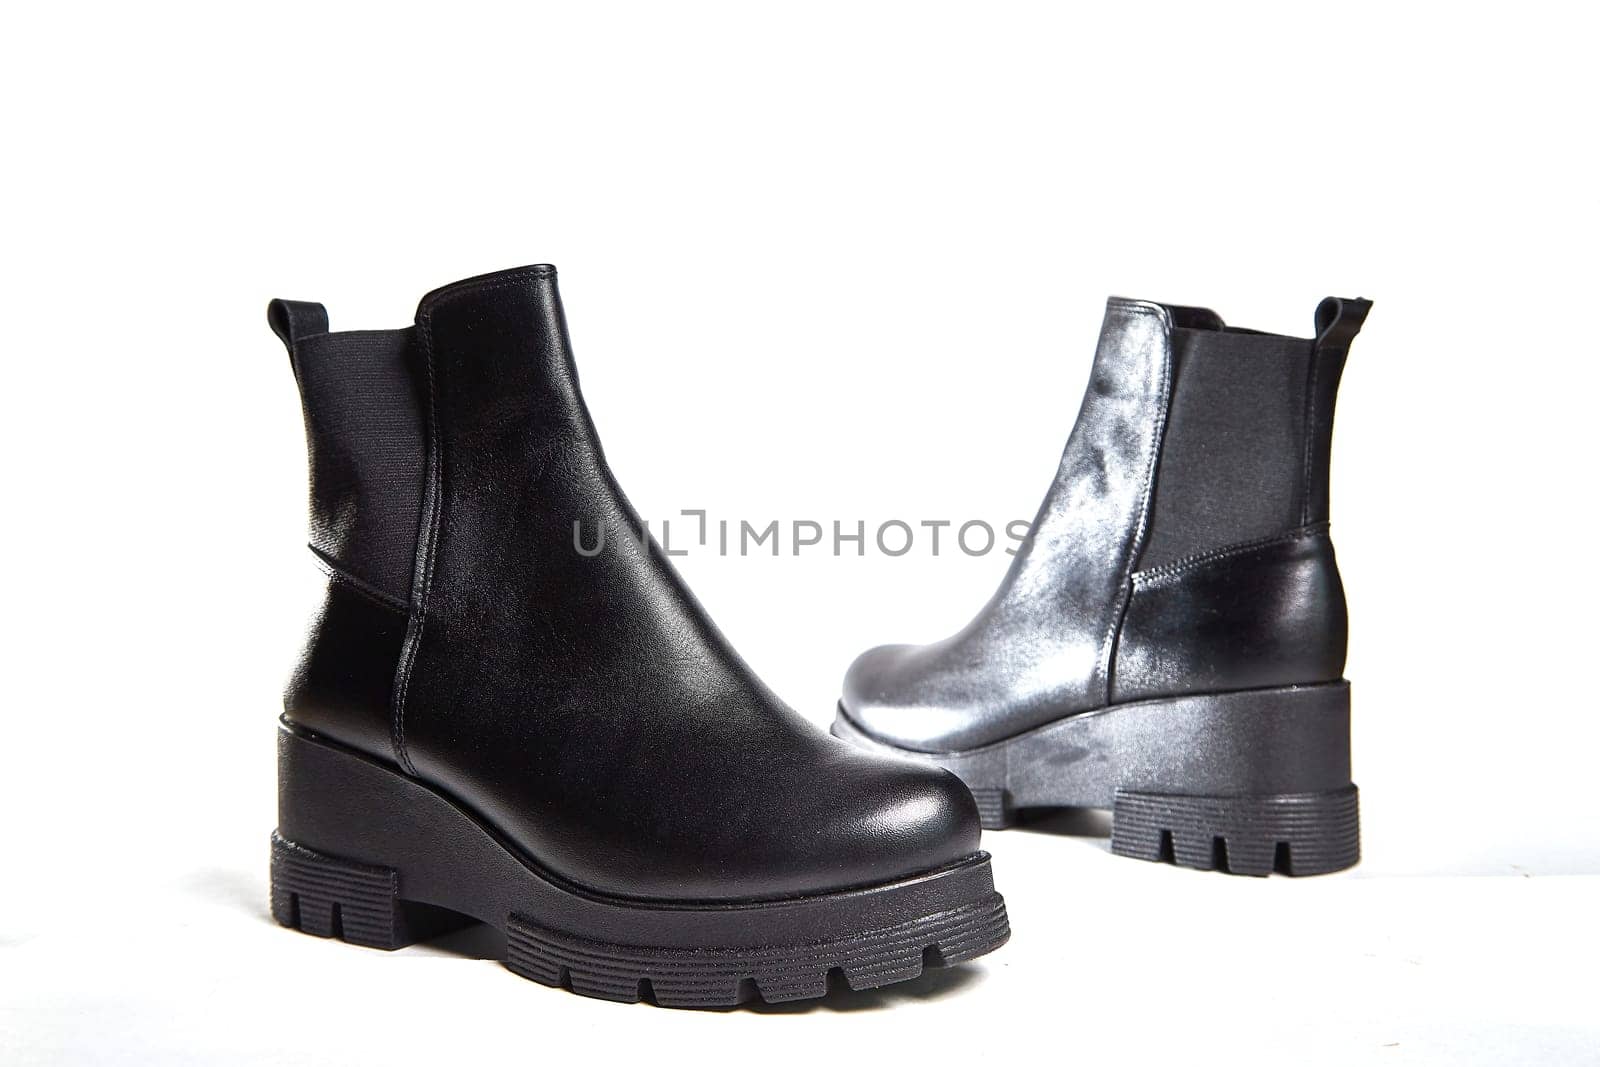 Female winter, autumn or spring black leather shoes in studio. Fashionable modern photography for store, catalog, magazine or online